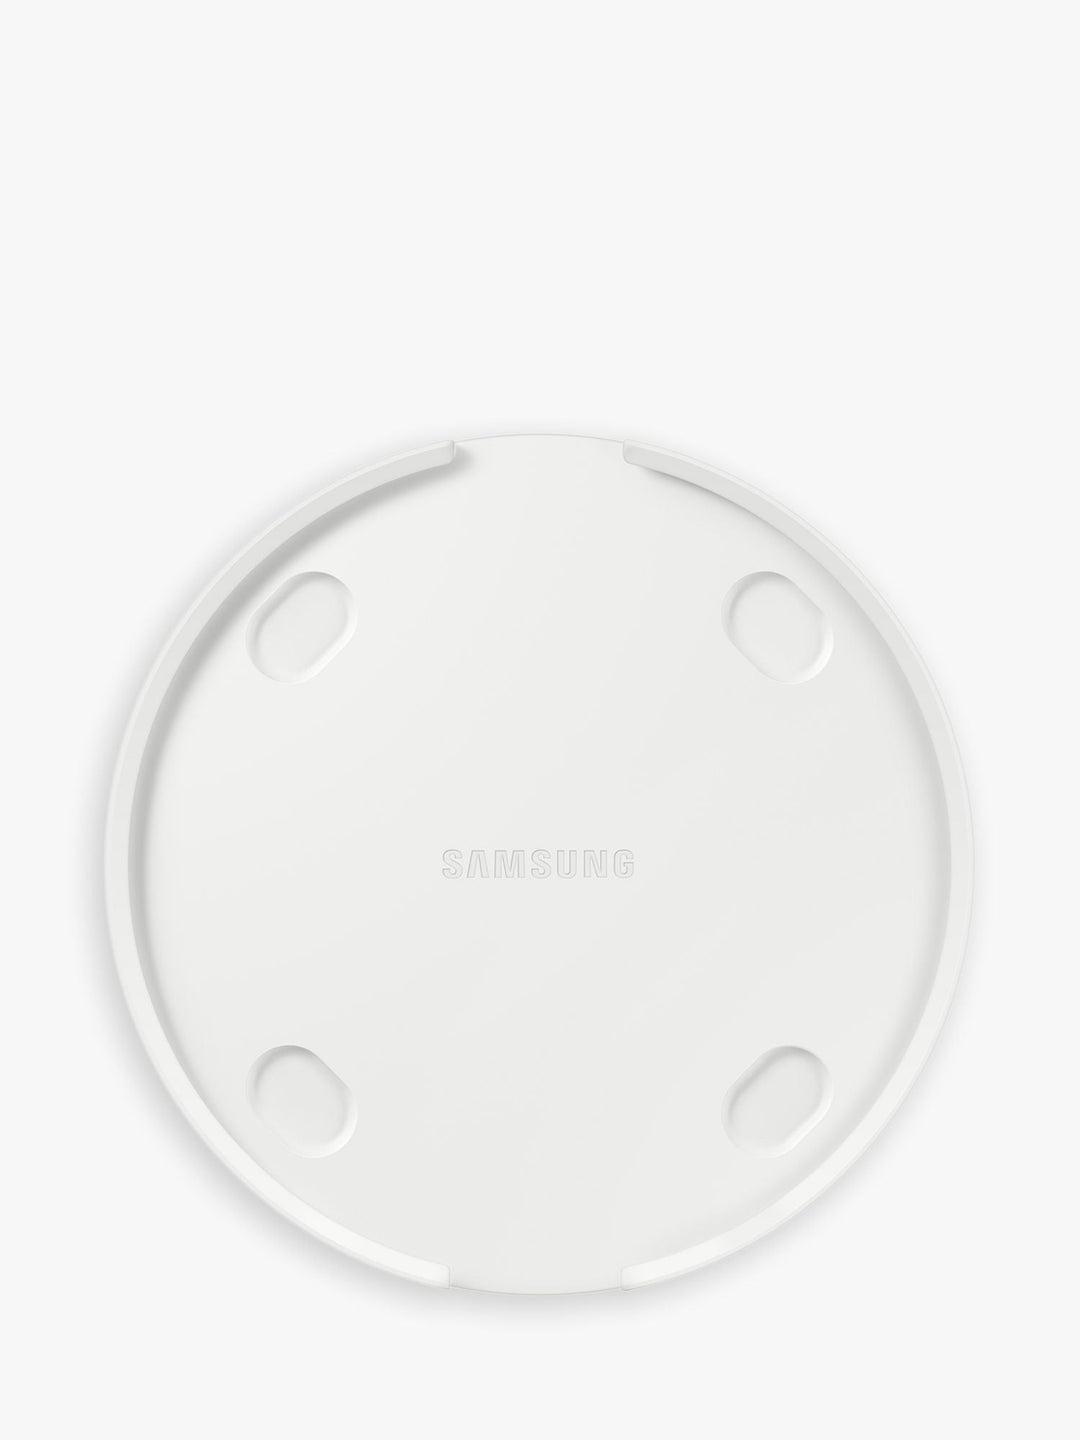 Samsung Freestyle Projector Portable Battery Base 32000mAh High Capacity, USB Charging Port, White